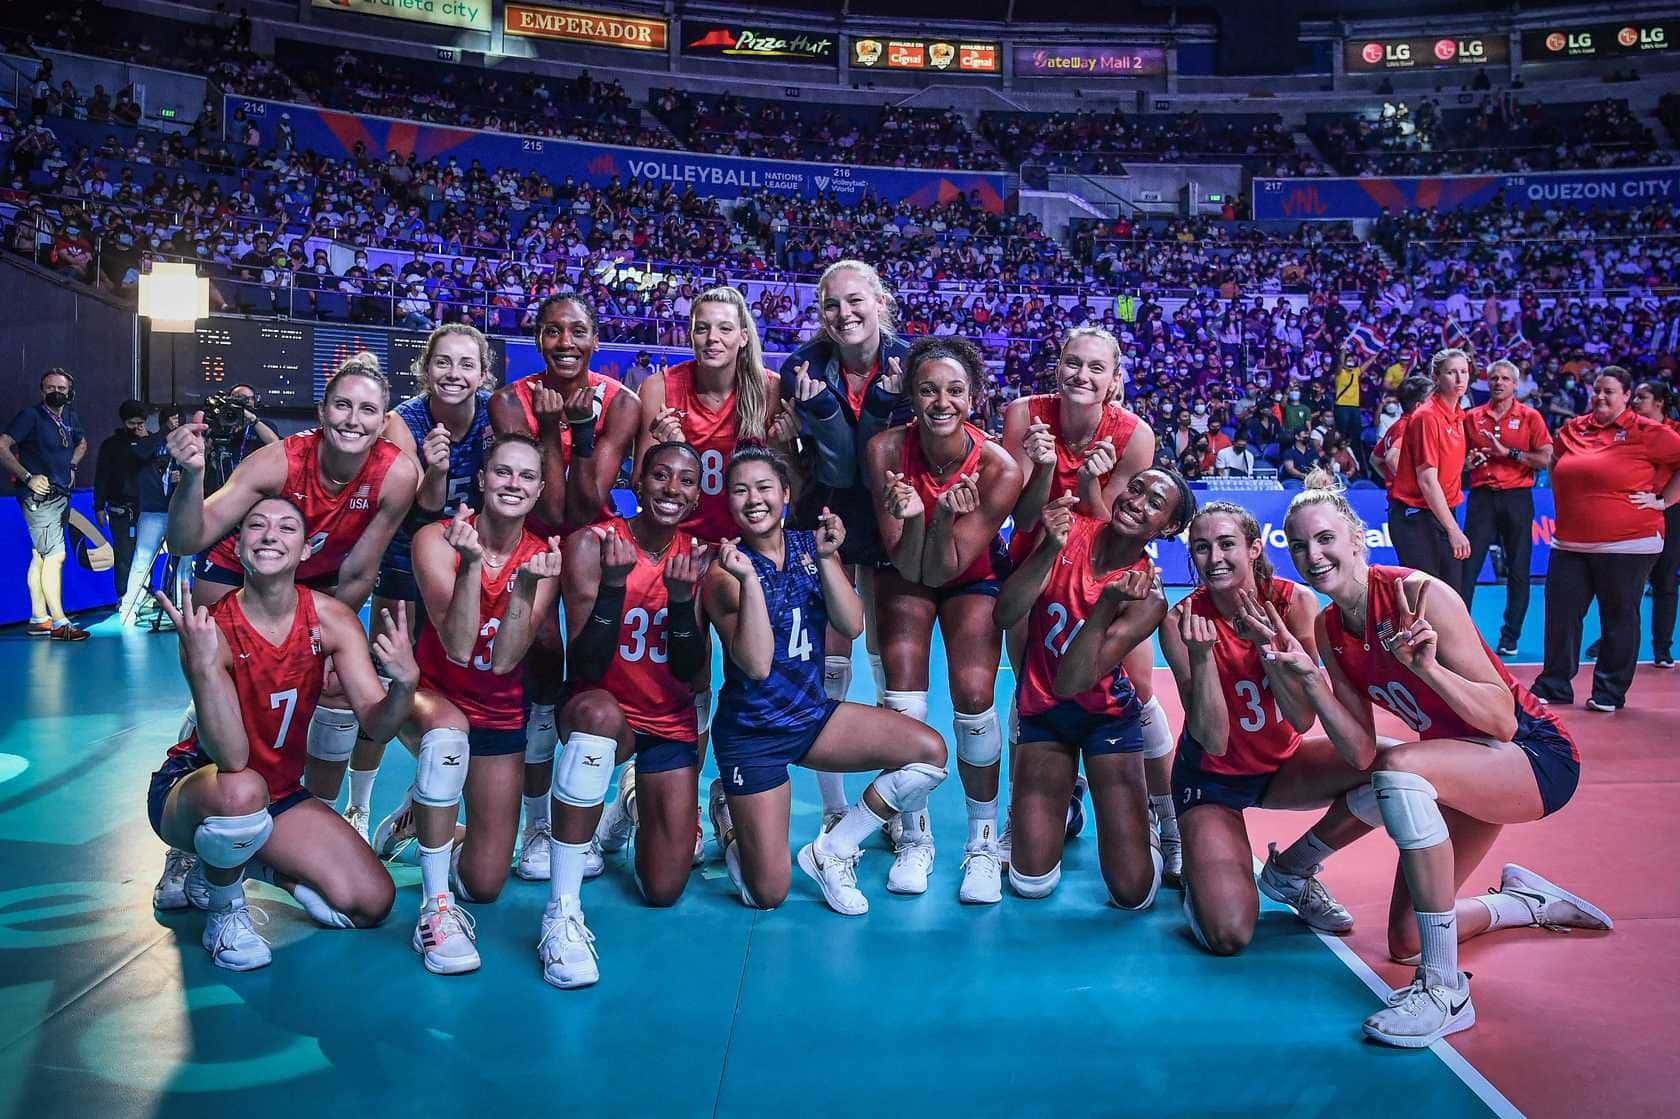 Volleyball Nations League Brings Top Womens Teams to Compete in Arlington 